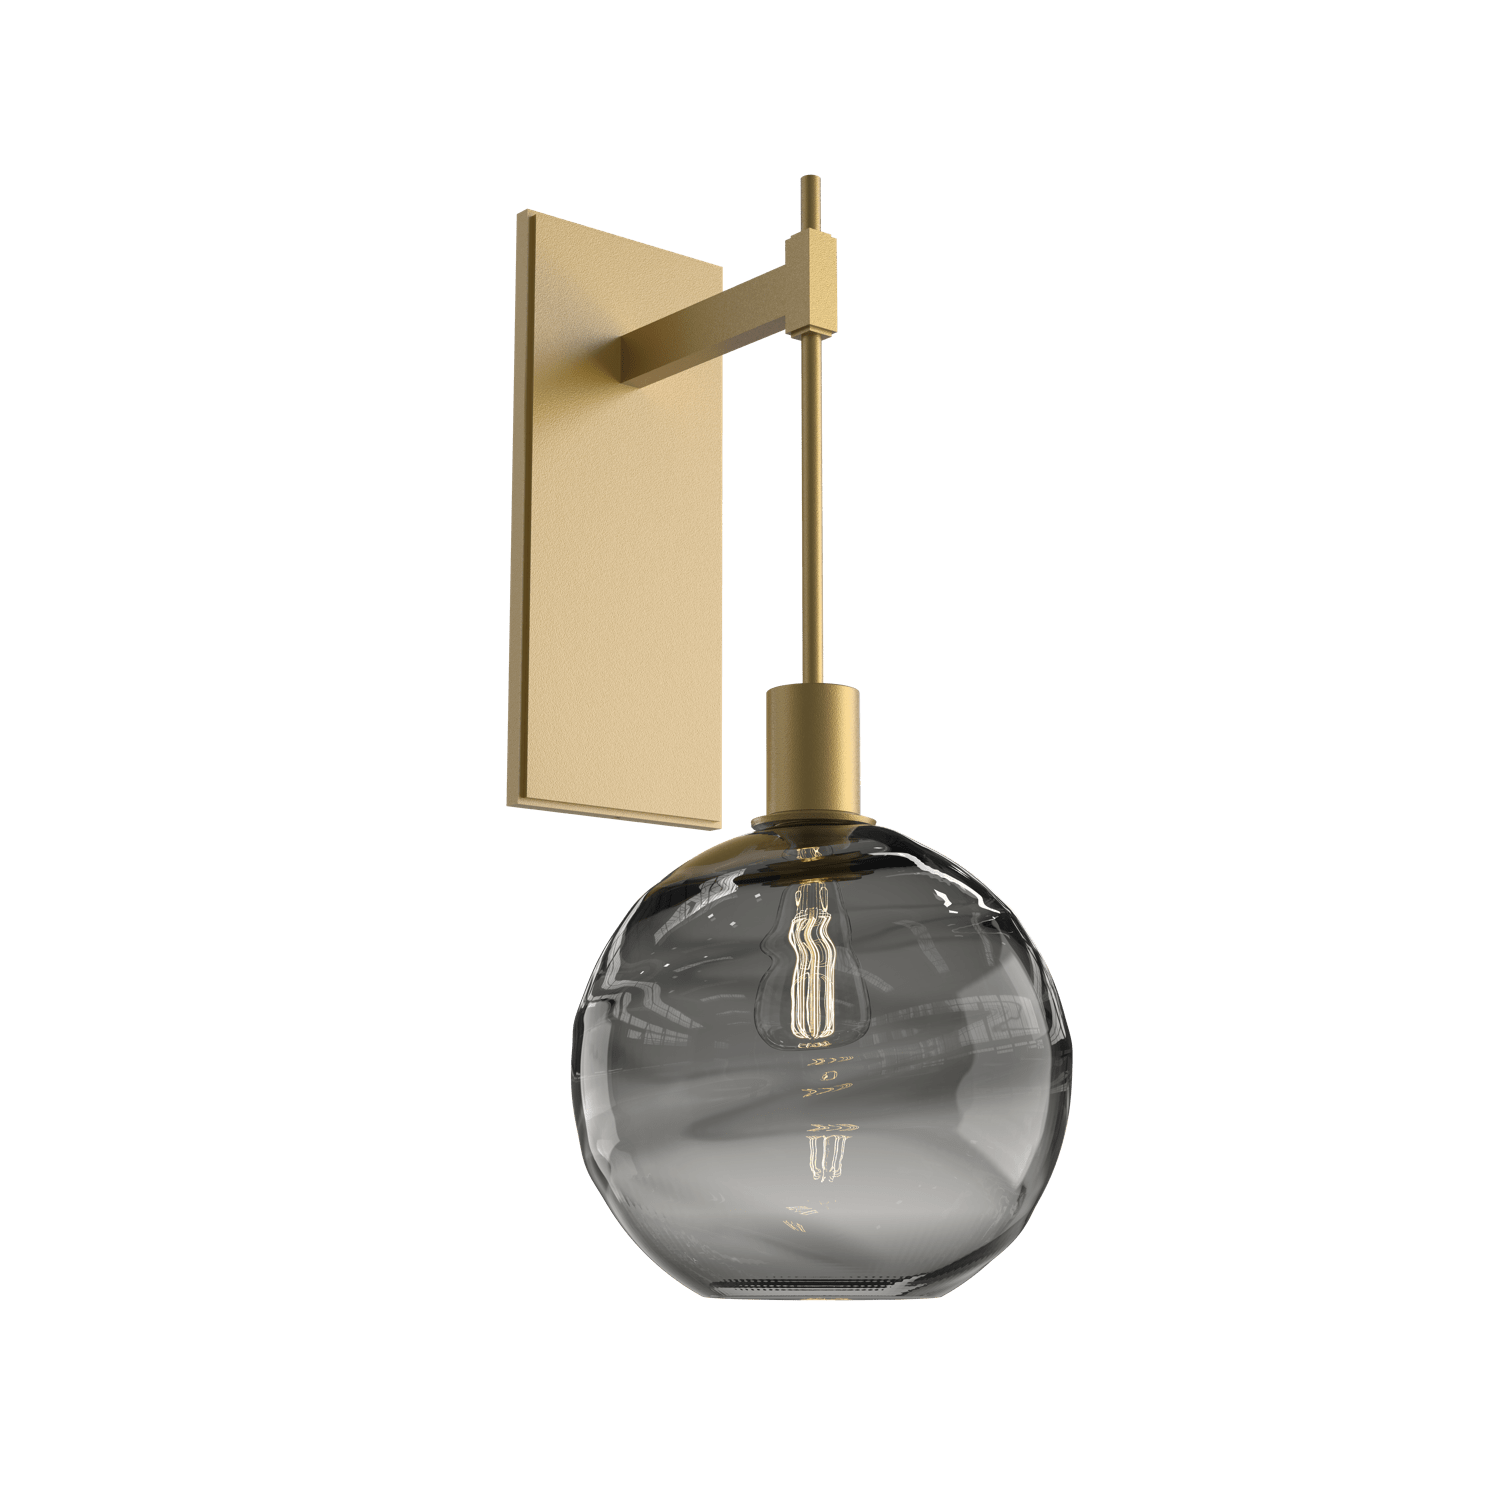 IDB0047-22-GB-OS-Hammerton-Studio-Optic-Blown-Glass-Terra-tempo-wall-sconce-with-gilded-brass-finish-and-optic-smoke-blown-glass-shades-and-incandescent-lamping